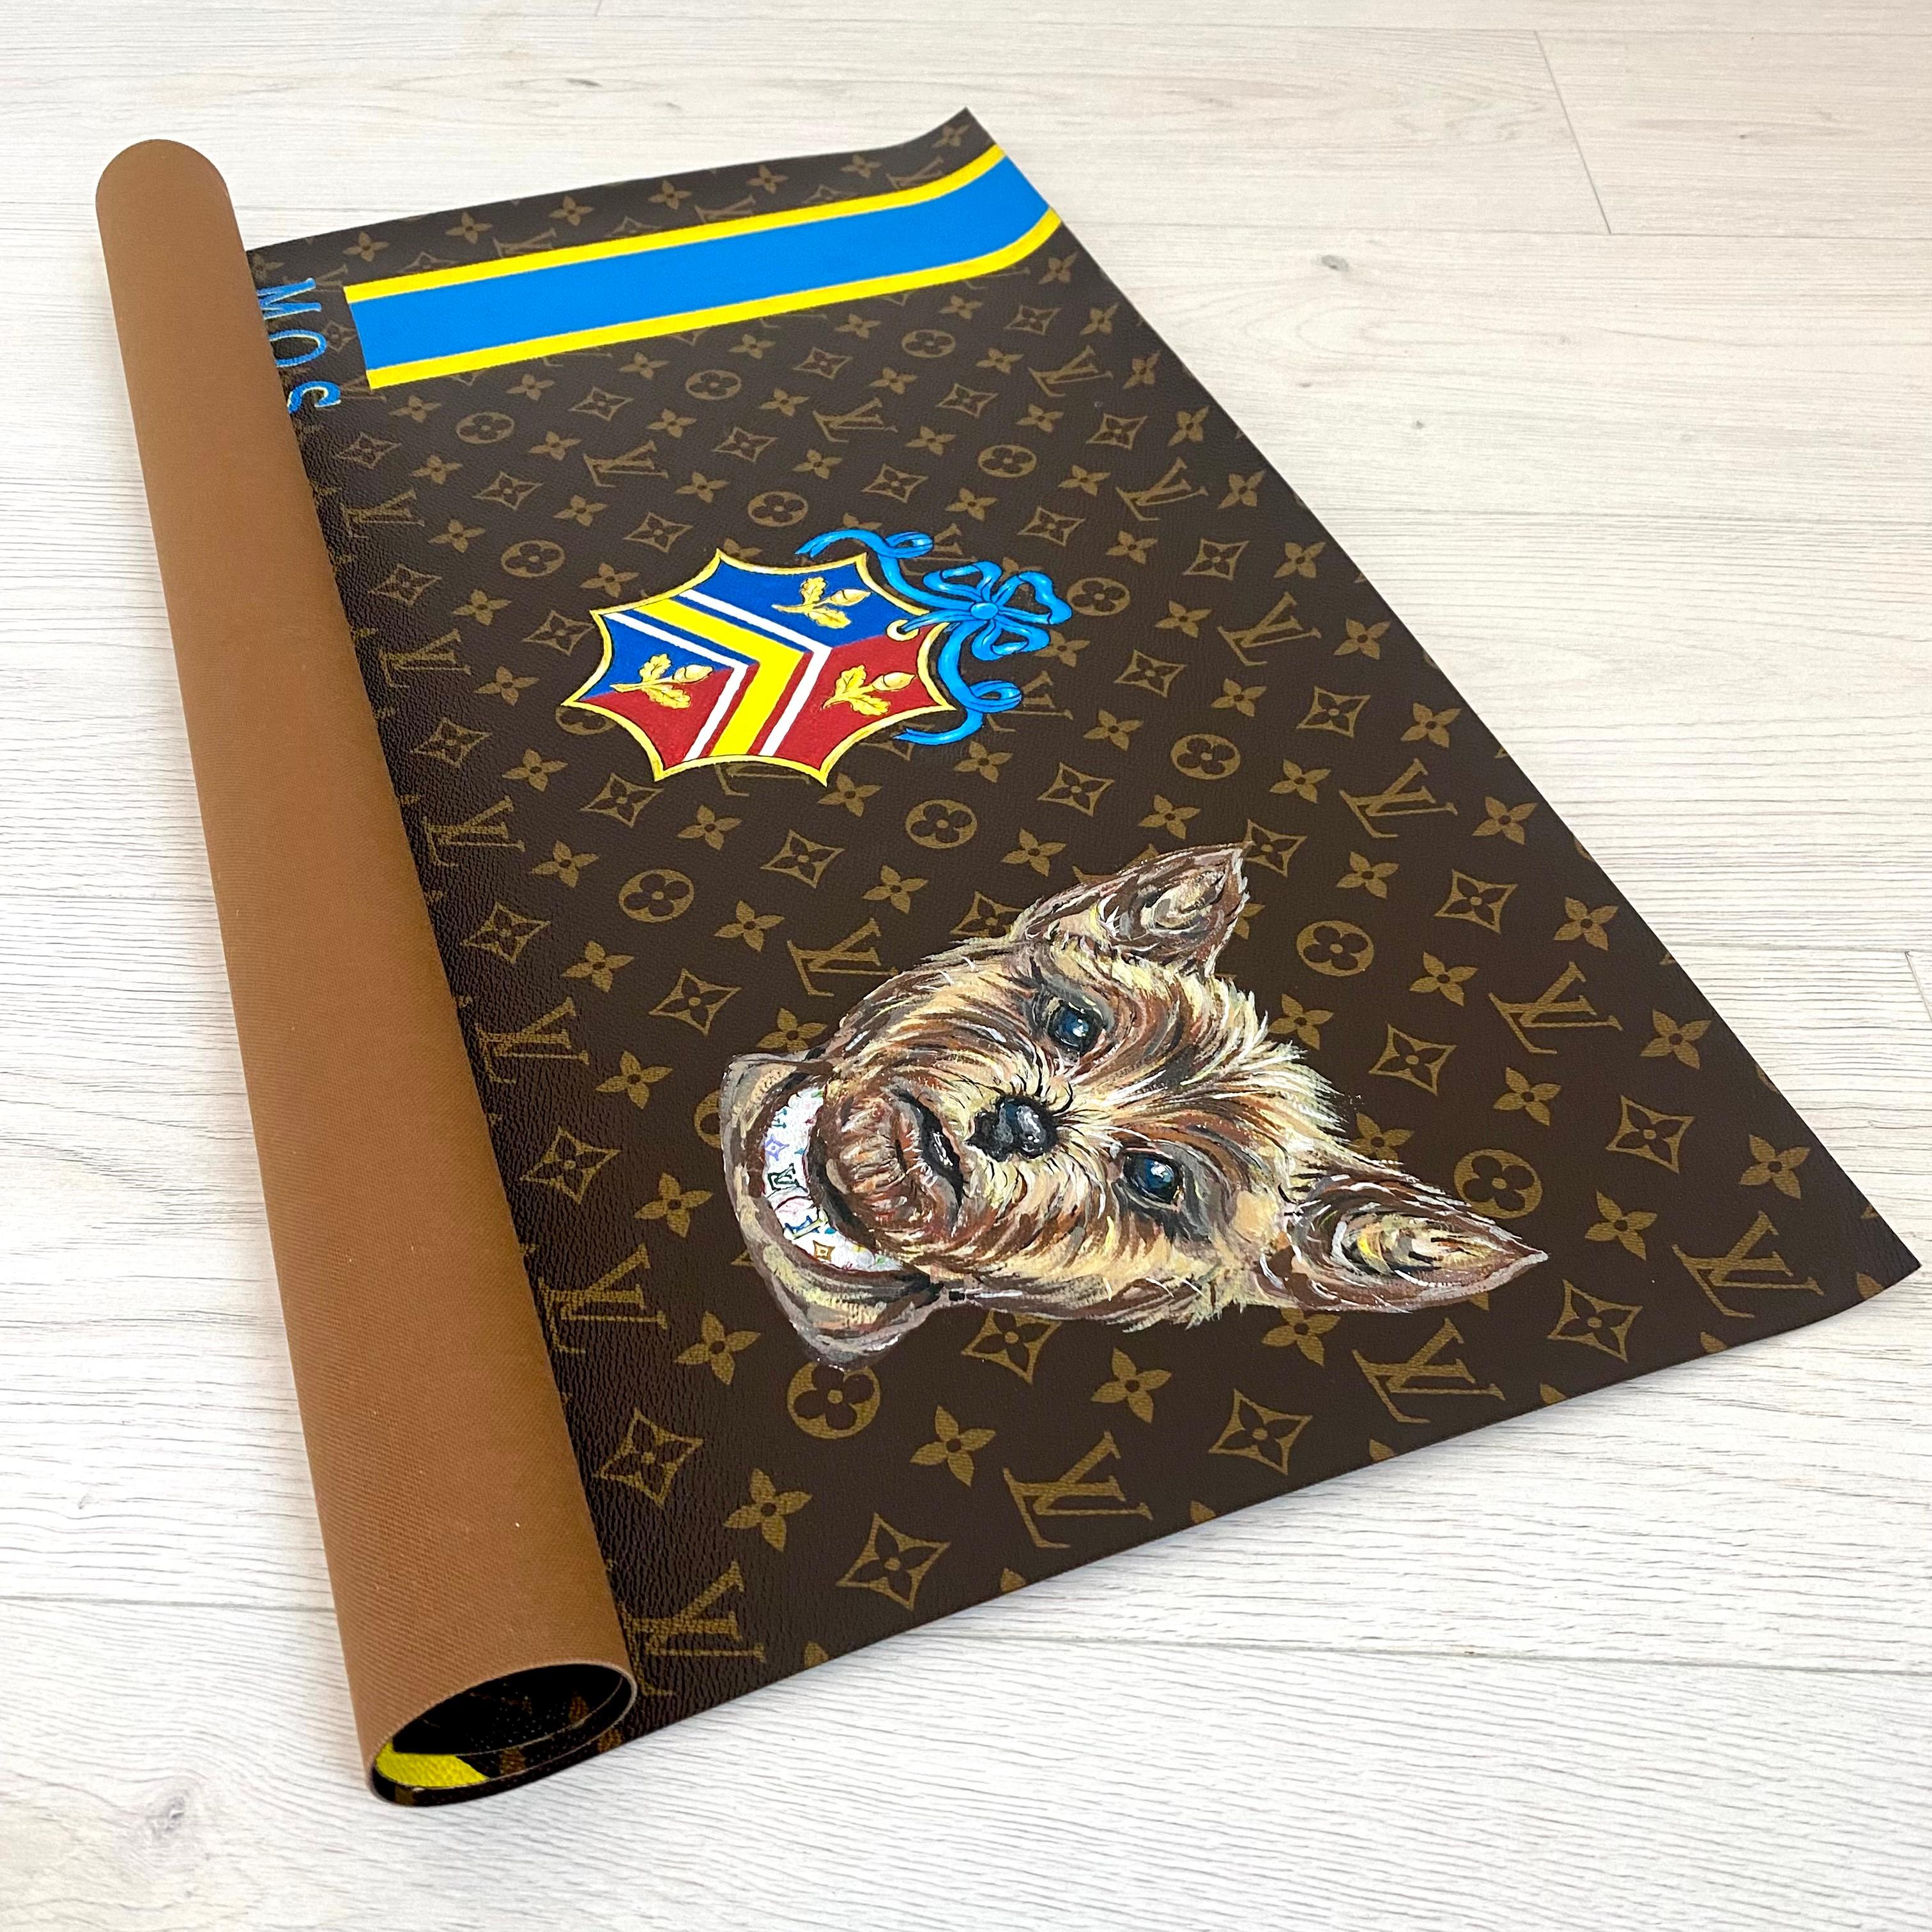 Unusual artwork made on an original piece of Louis Vuitton monogrammed canvas. Hand painted items include an adorable Yorkie with LV collar, Statue of Liberty and initialed lettering. Louis Vuitton was having a contest to hire a new artist, and